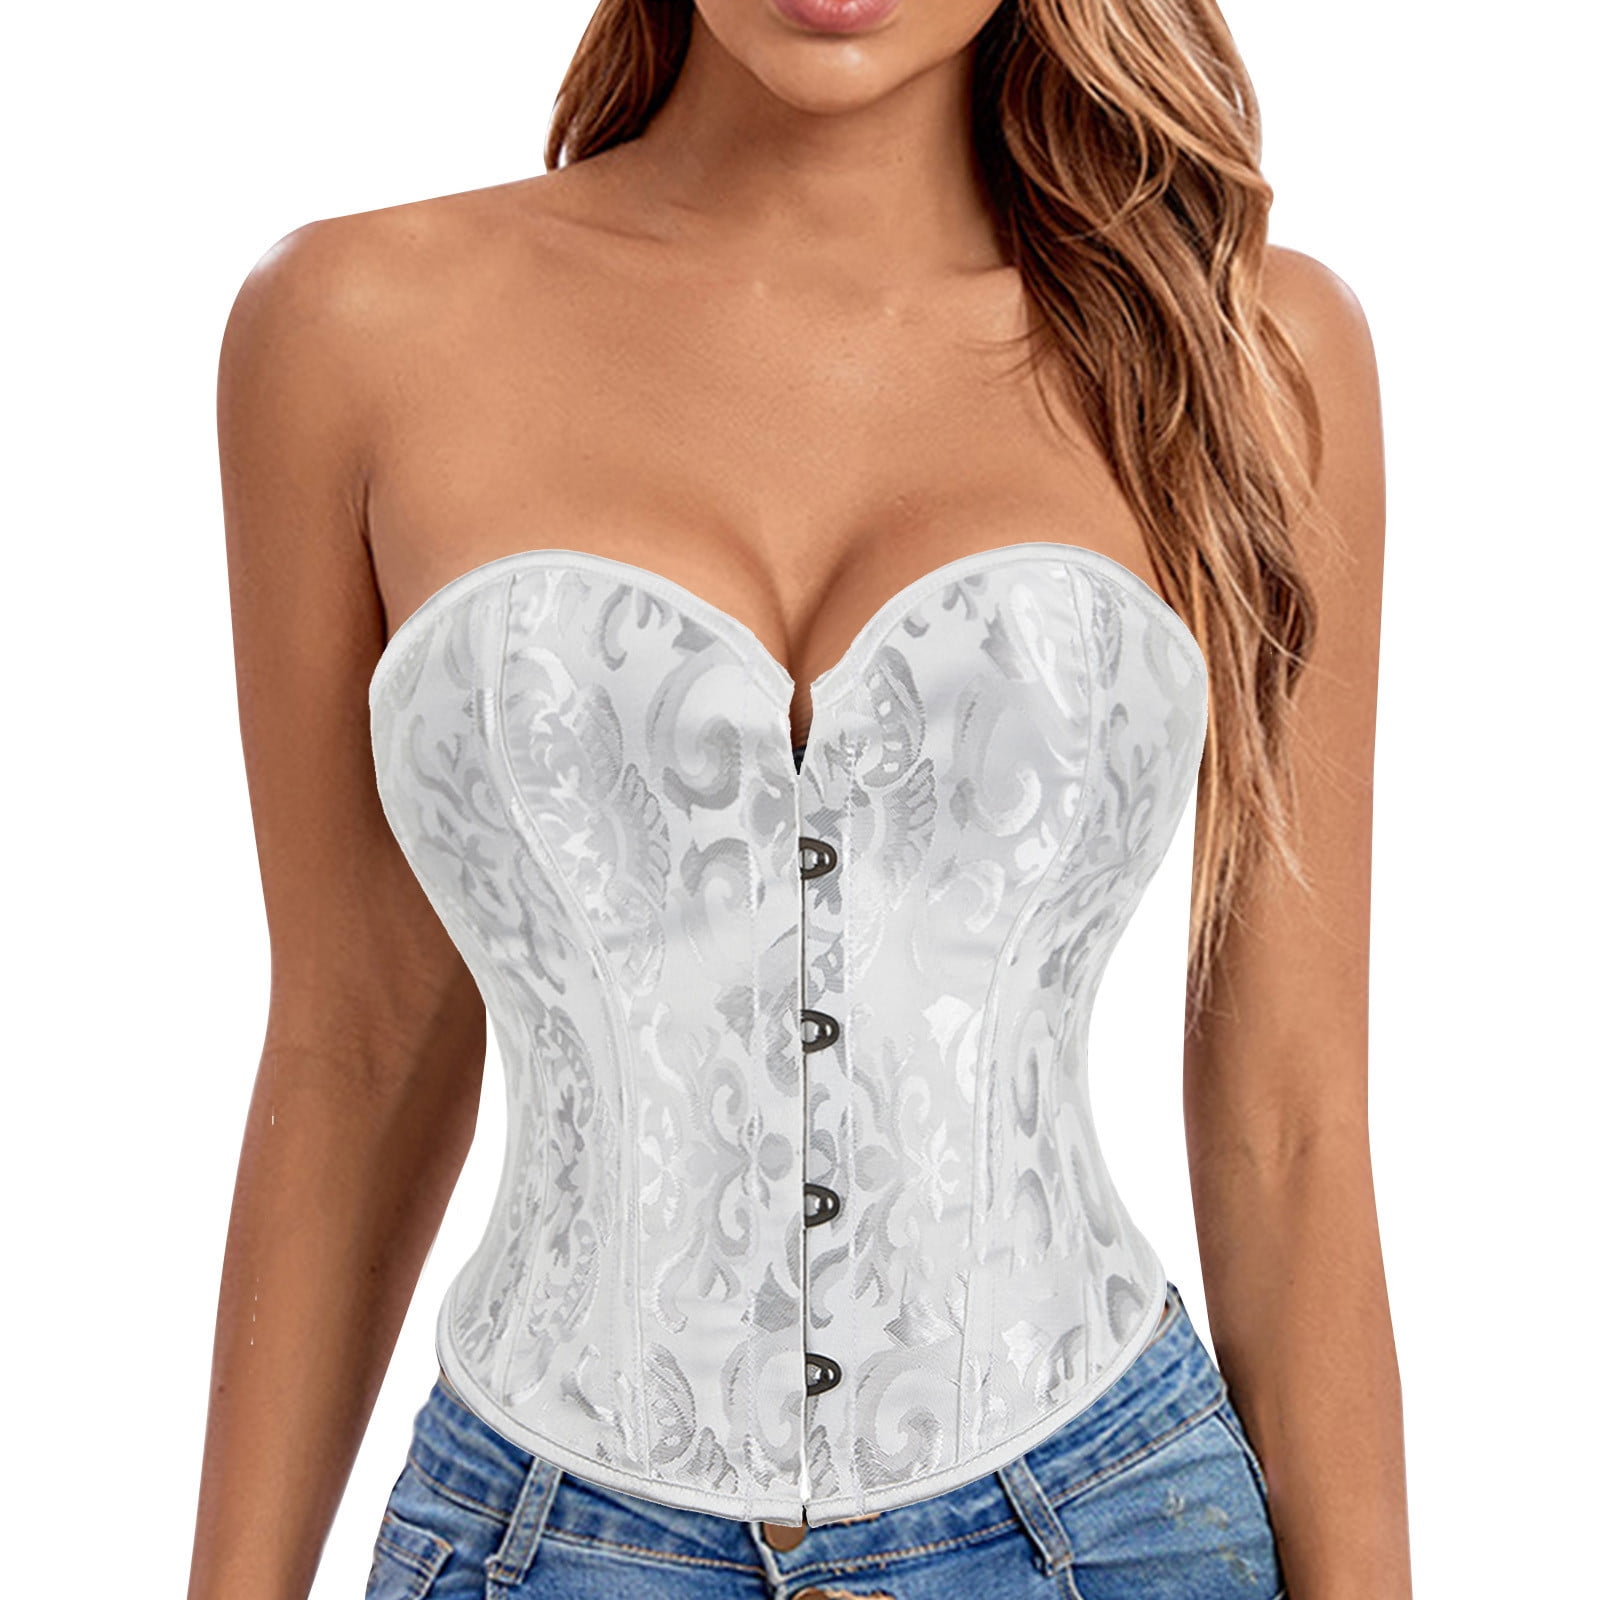 Plus Size Full Figure Sexy Underwire Lace Overlay Bustier Lingerie